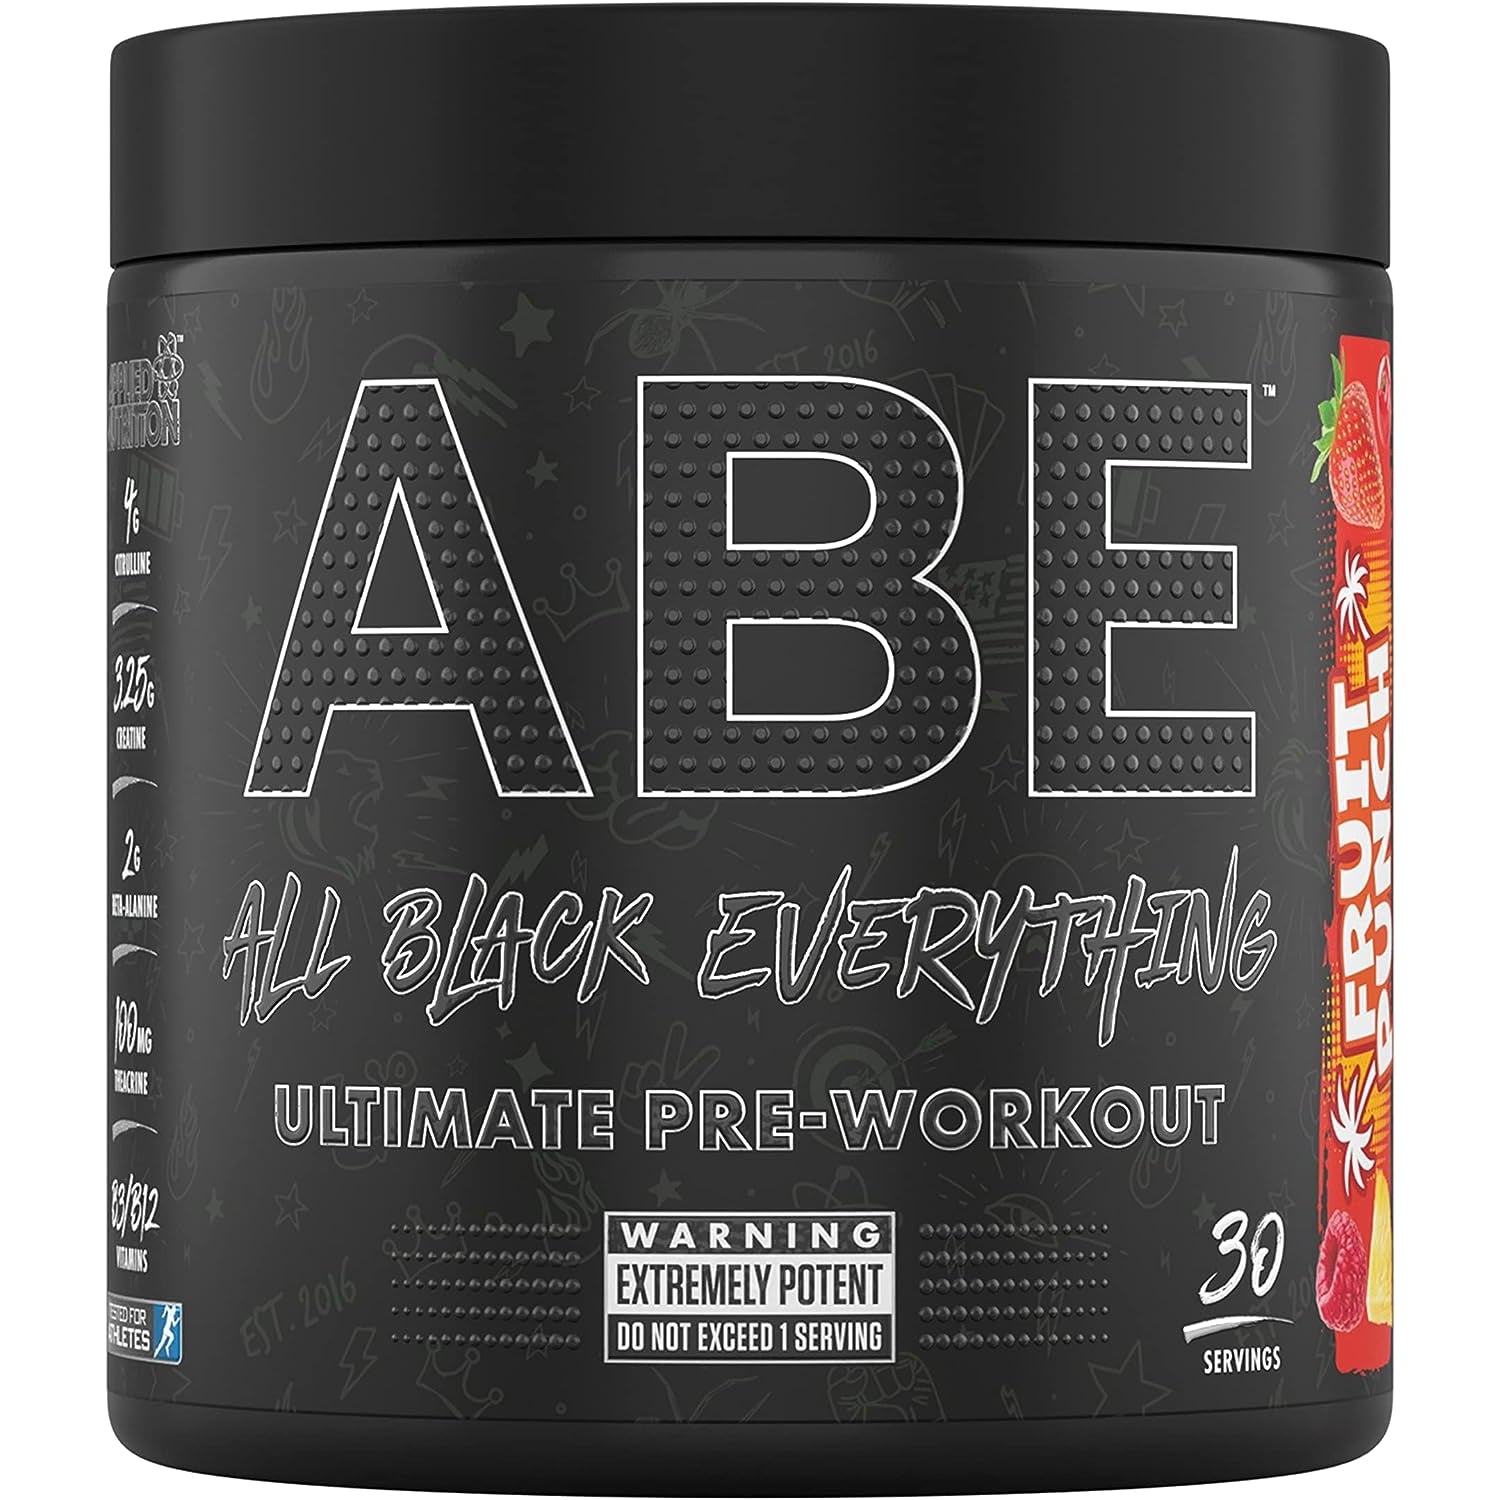 Applied Nutrition ABE Pre Workout - All Black Everything Pre Workout Powder with Citrulline, Creatine, Beta Alanine 315g - 30 Servings Fruit Bunch